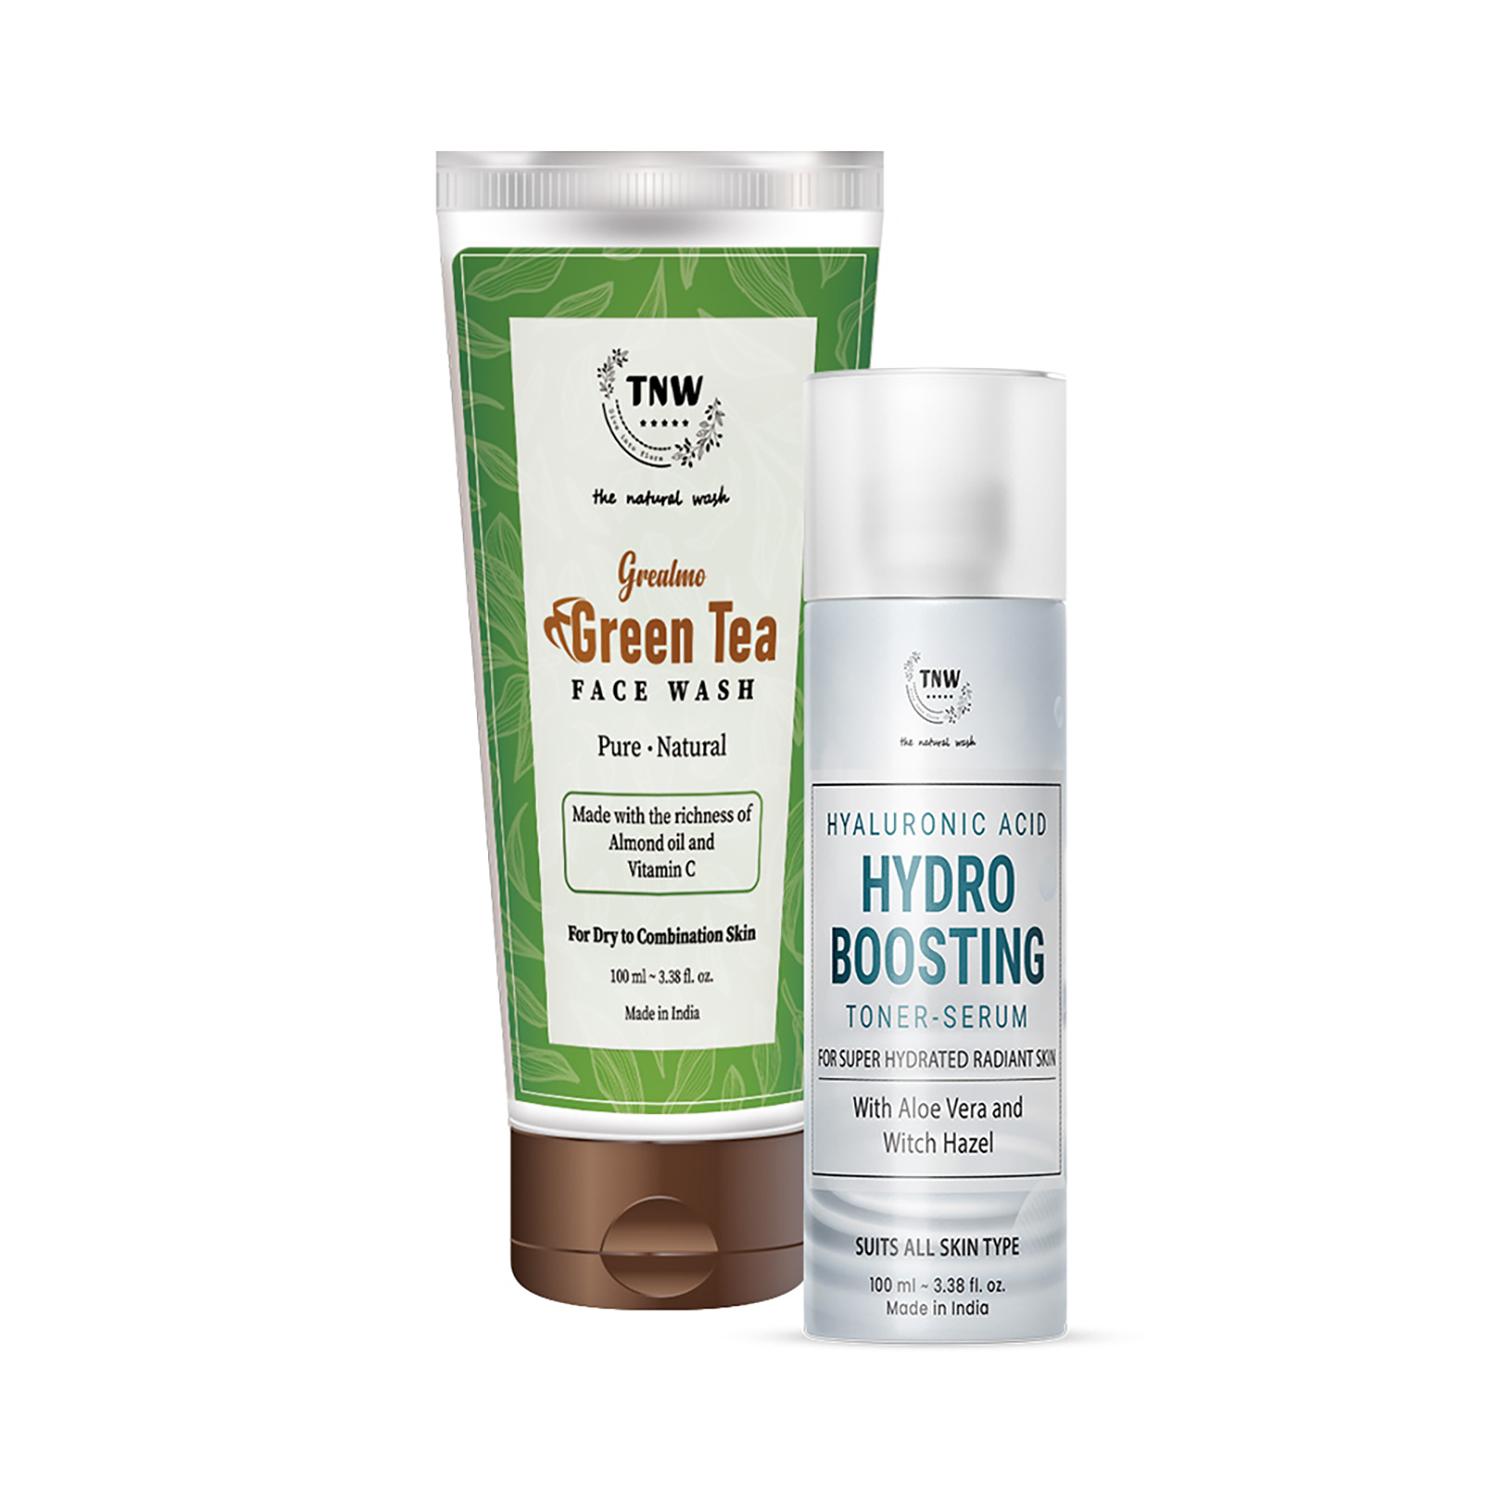 TNW The Natural Wash | TNW - The Natural Wash Green Tea Face Wash and Hyaluronic Acid Toner Combo